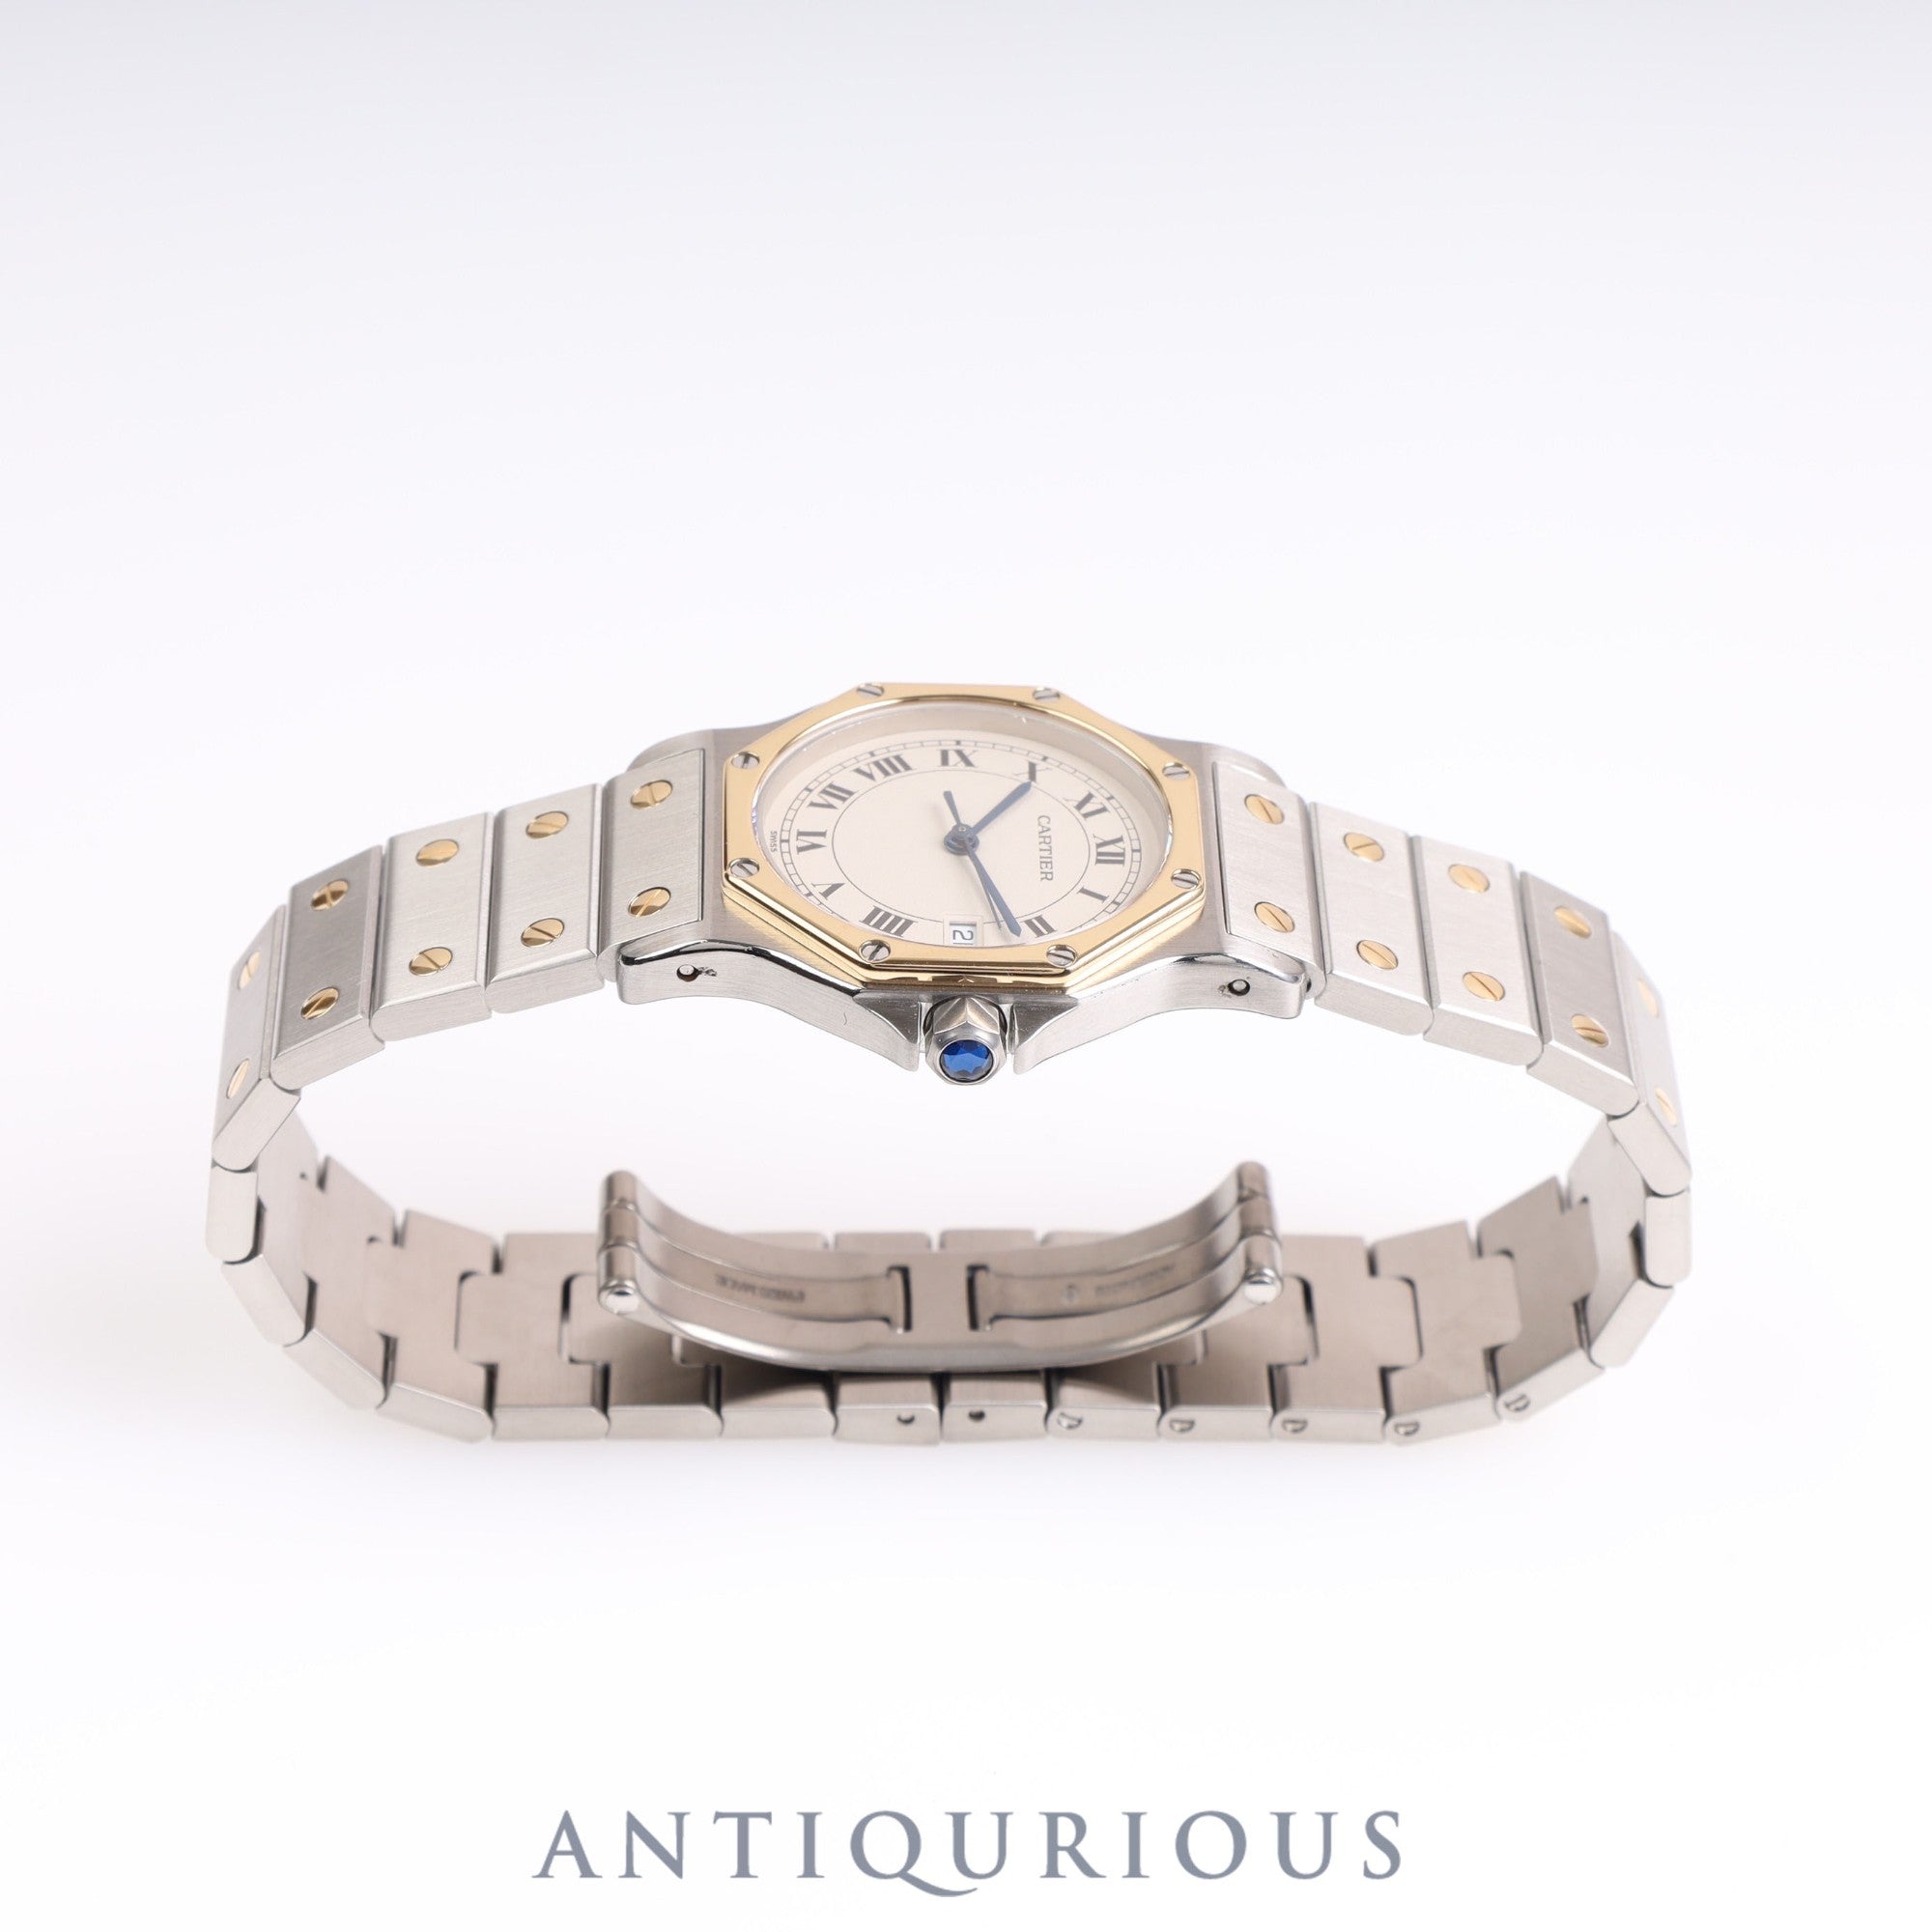 CARTIER SANTOS OCTAGON LM W2001583 Complete service completed